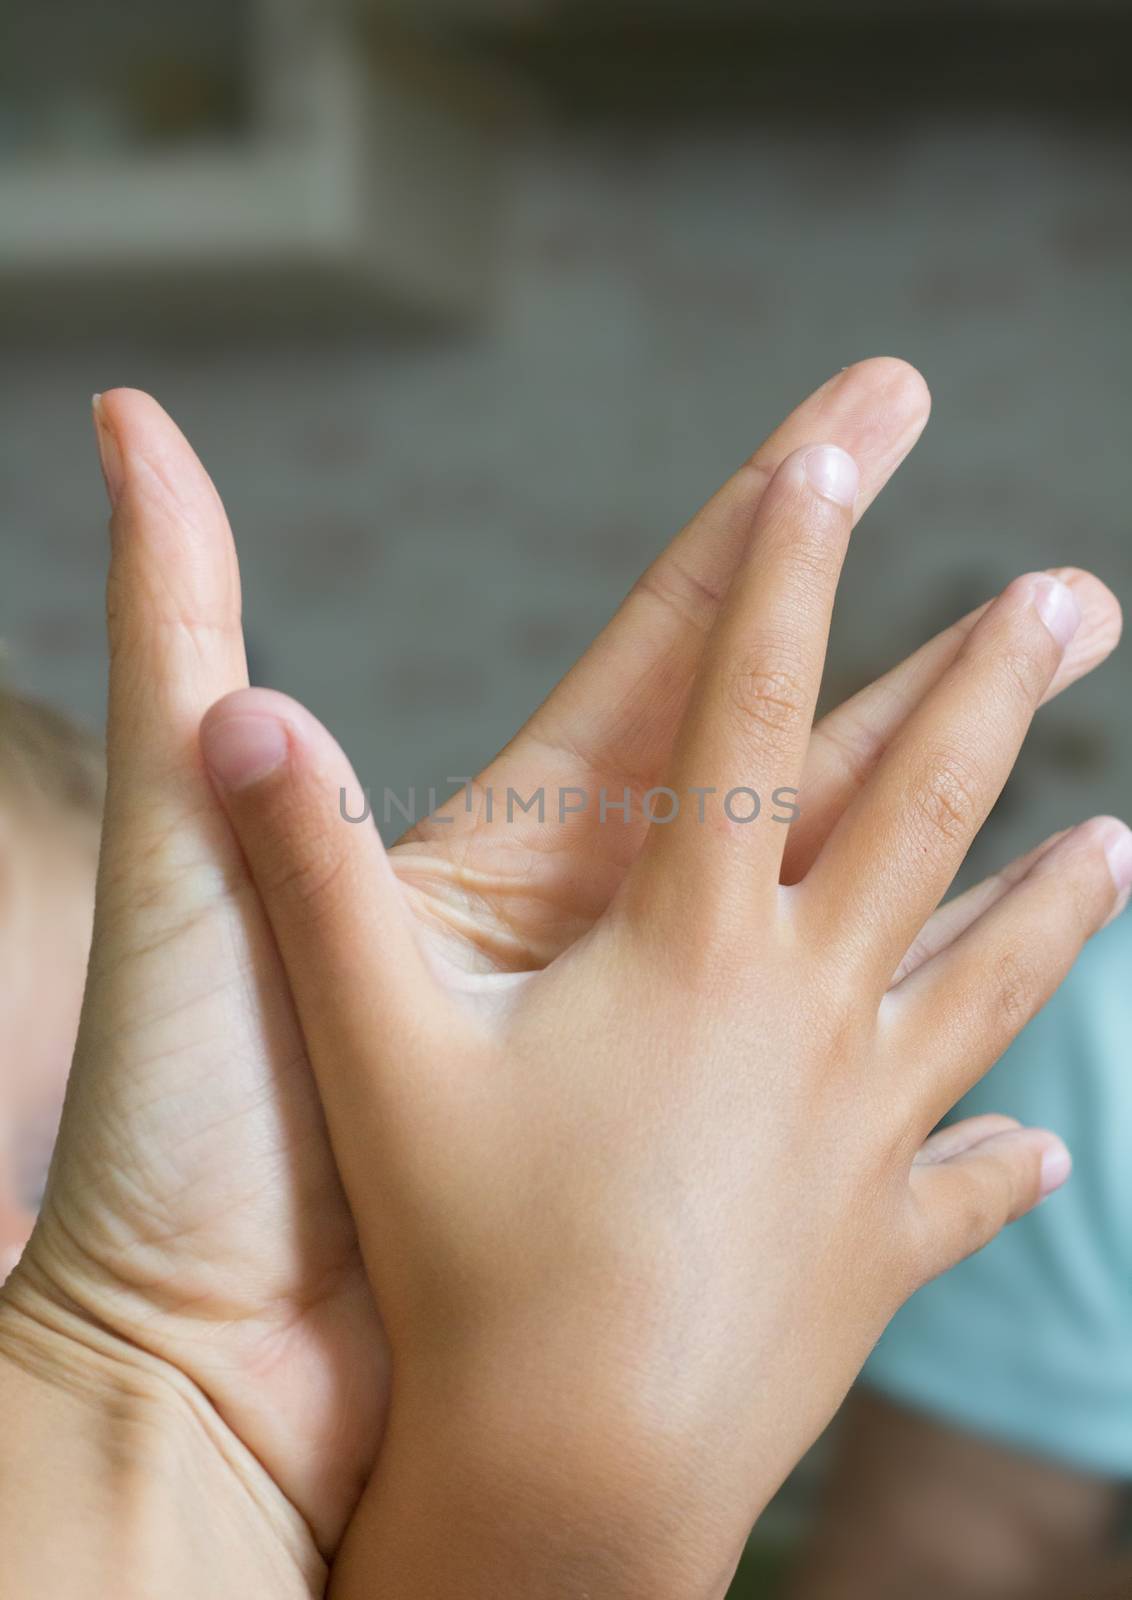 Two human hands of adult and child holding together showing love and careness